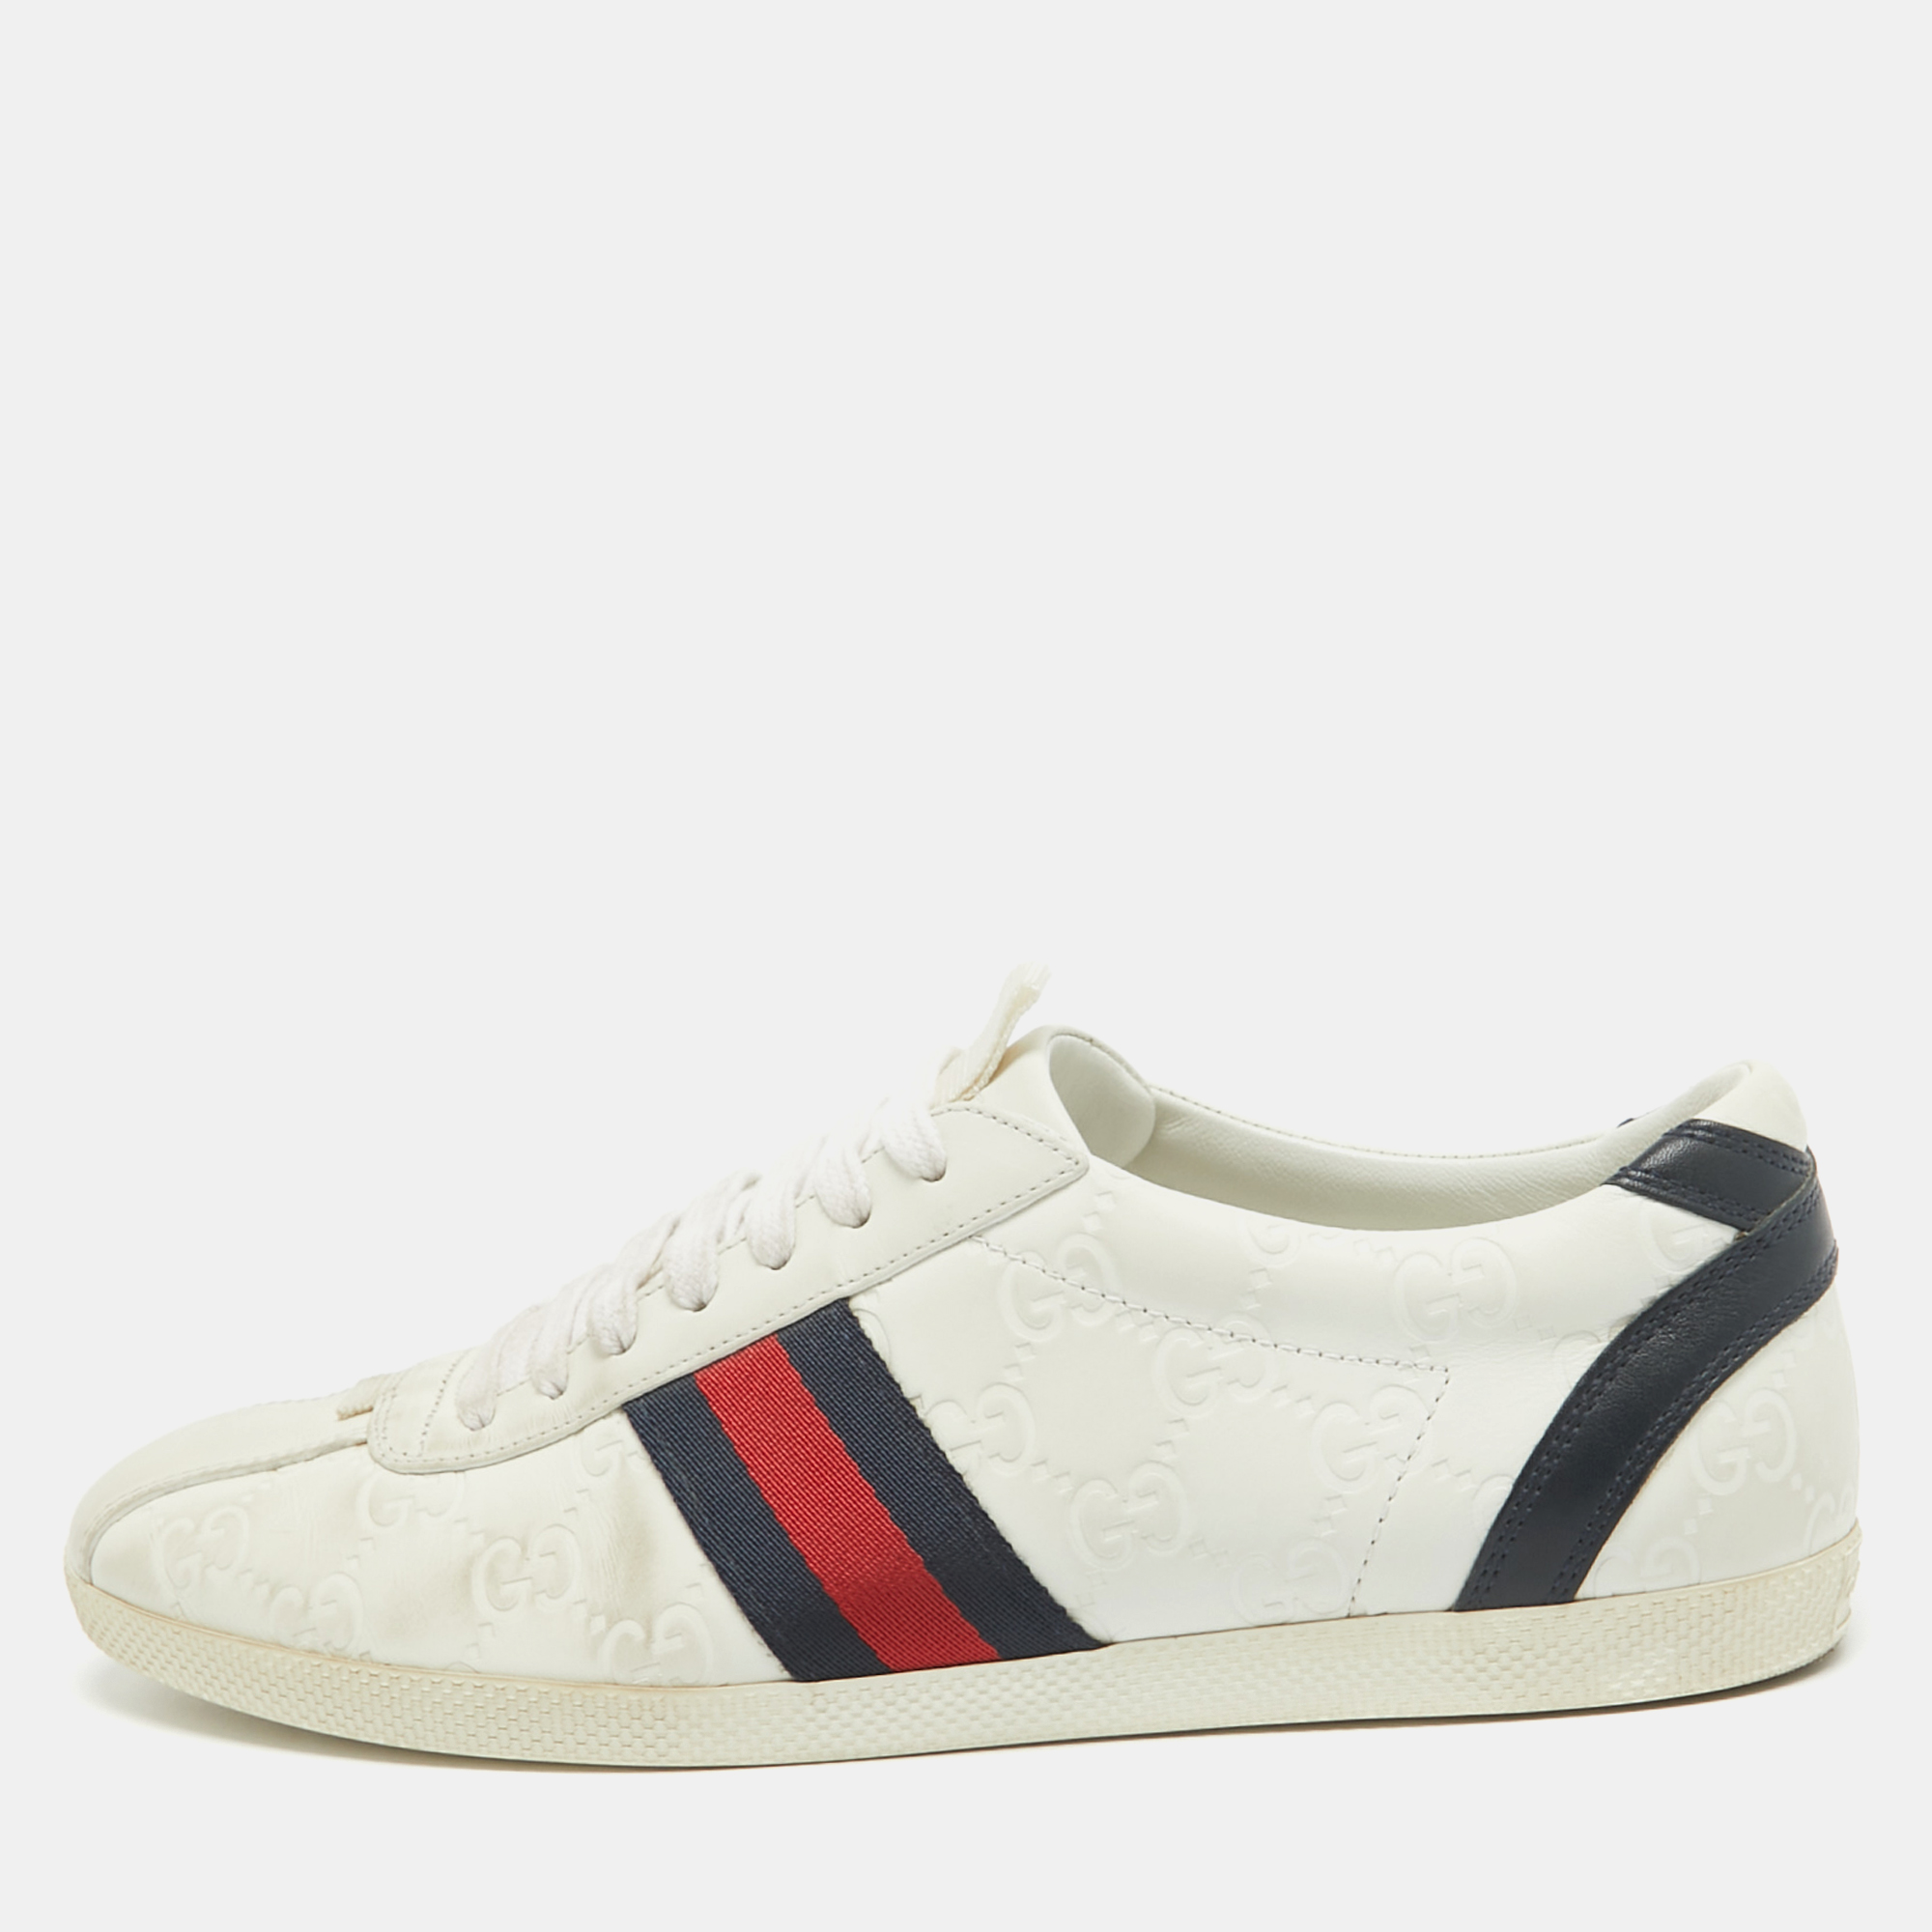 Gucci white guccissima leather web low top sneakers size 38